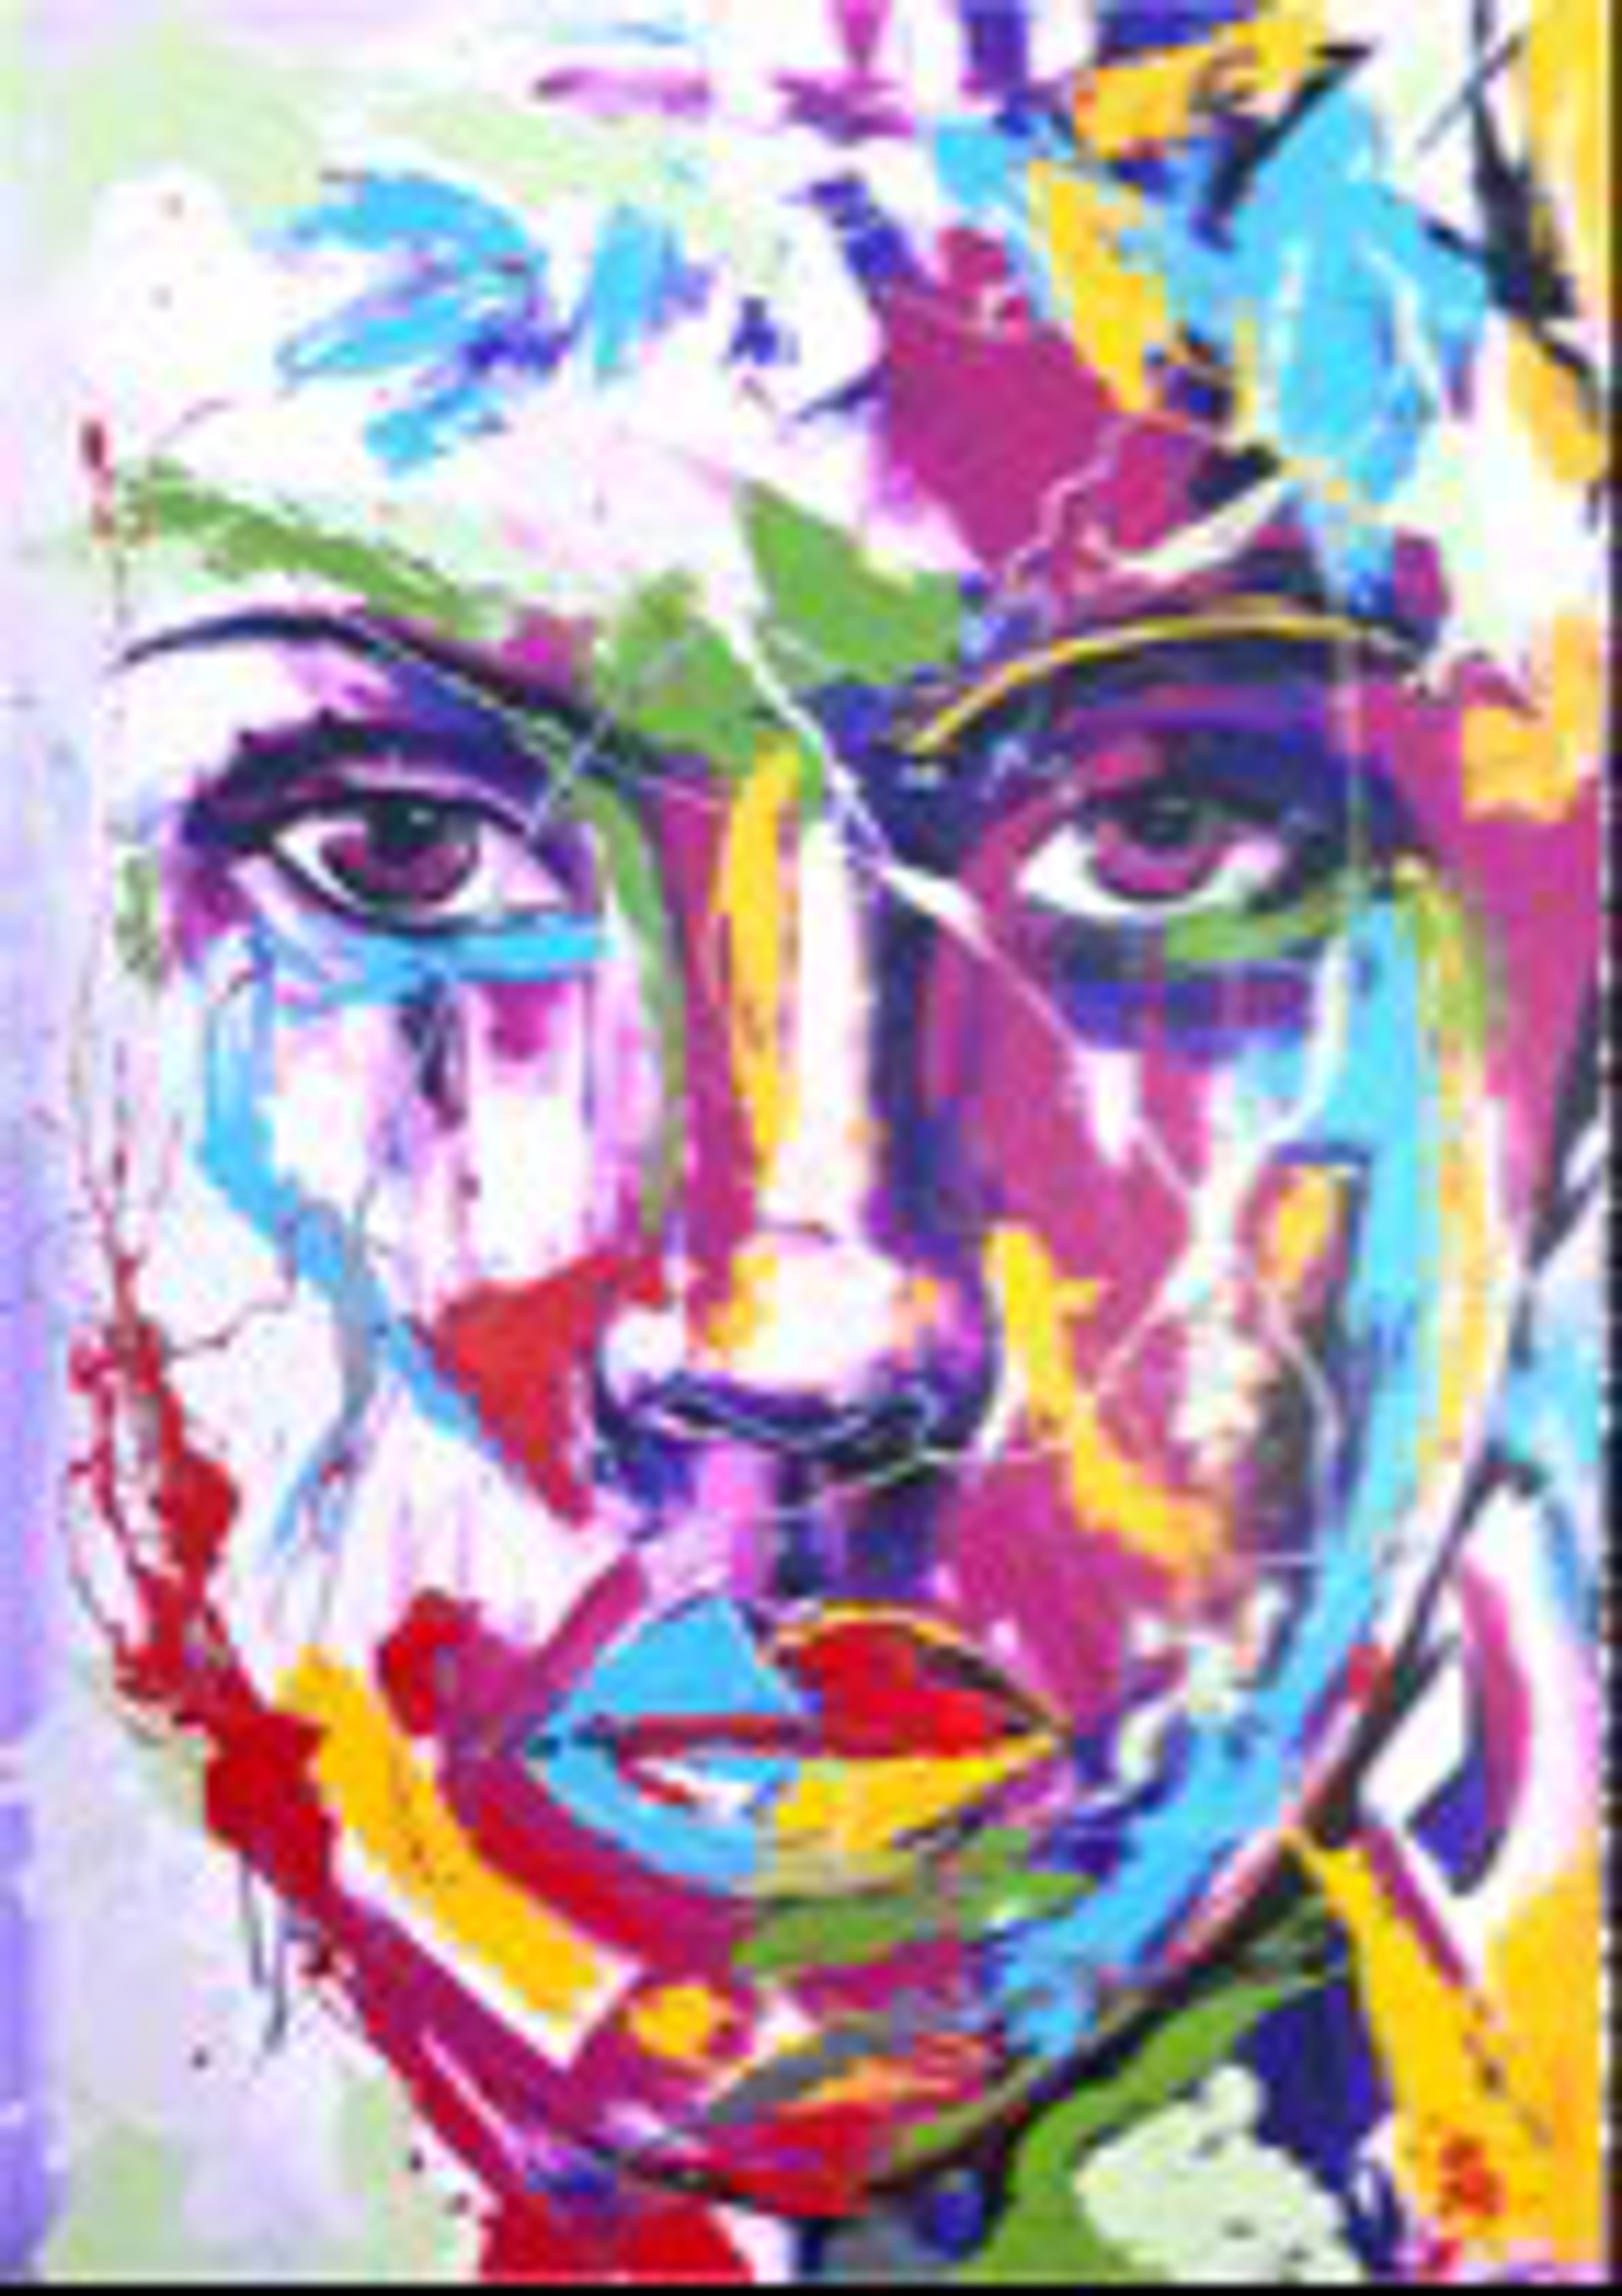 "Abstract Face" by BuMa Project